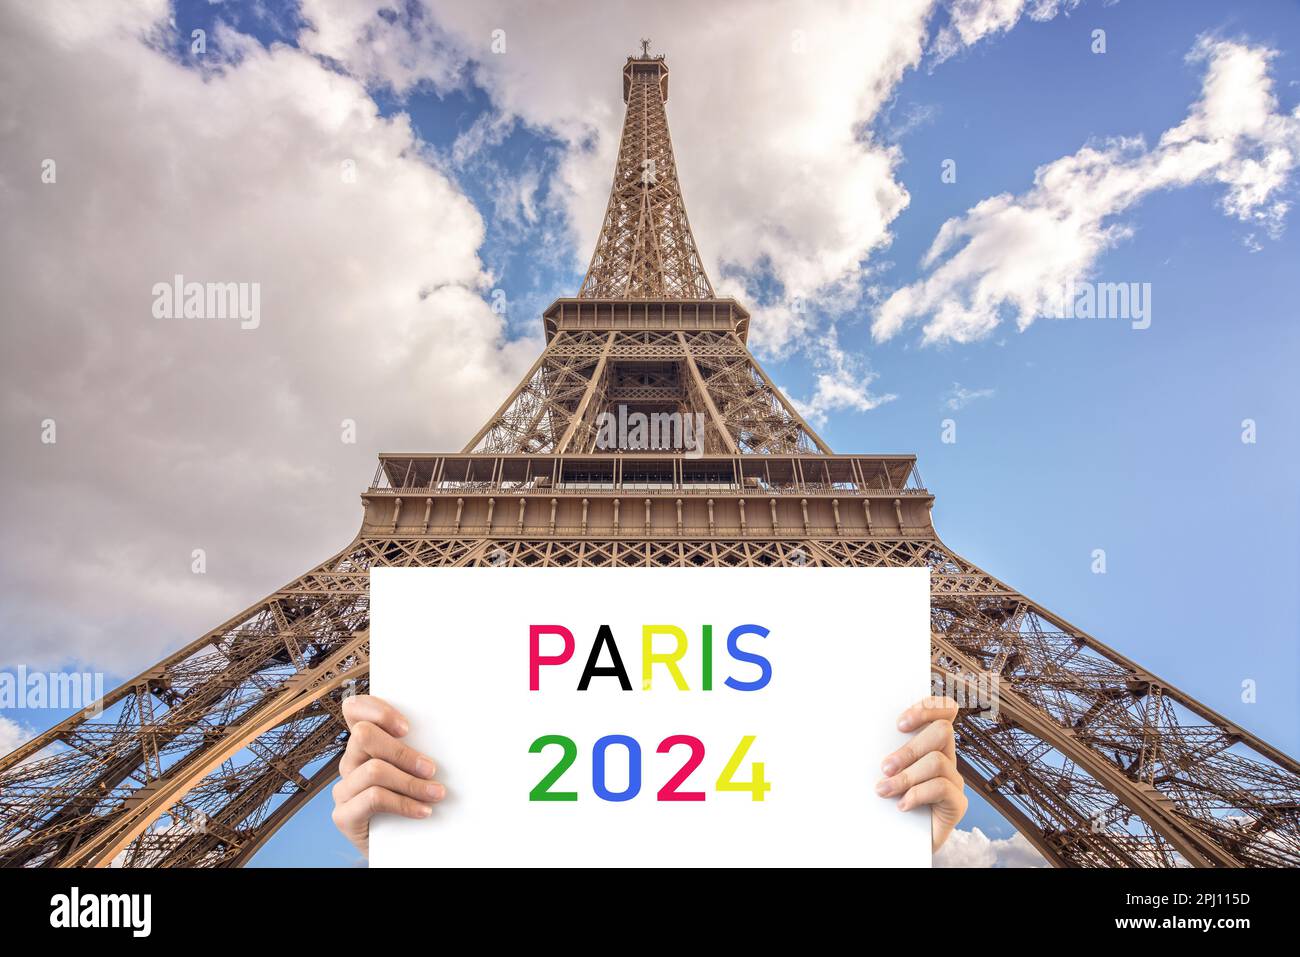 Paris 2024 sign and Eiffel tower, Olympic games in Paris, France Stock Photo